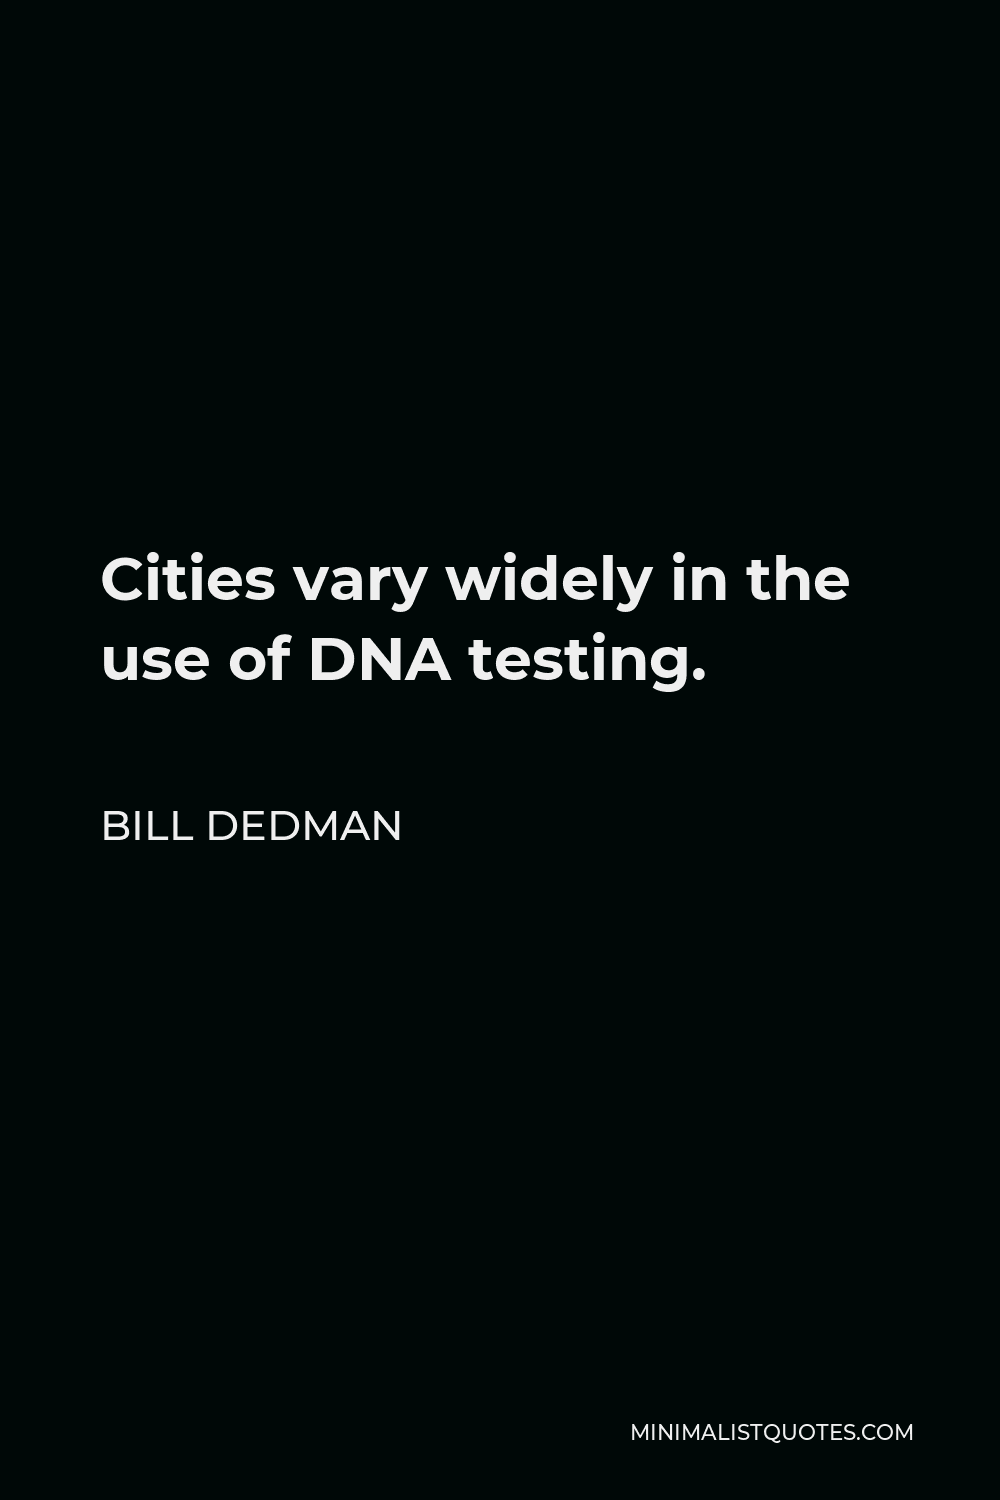 Bill Dedman Quote - Cities vary widely in the use of DNA testing.